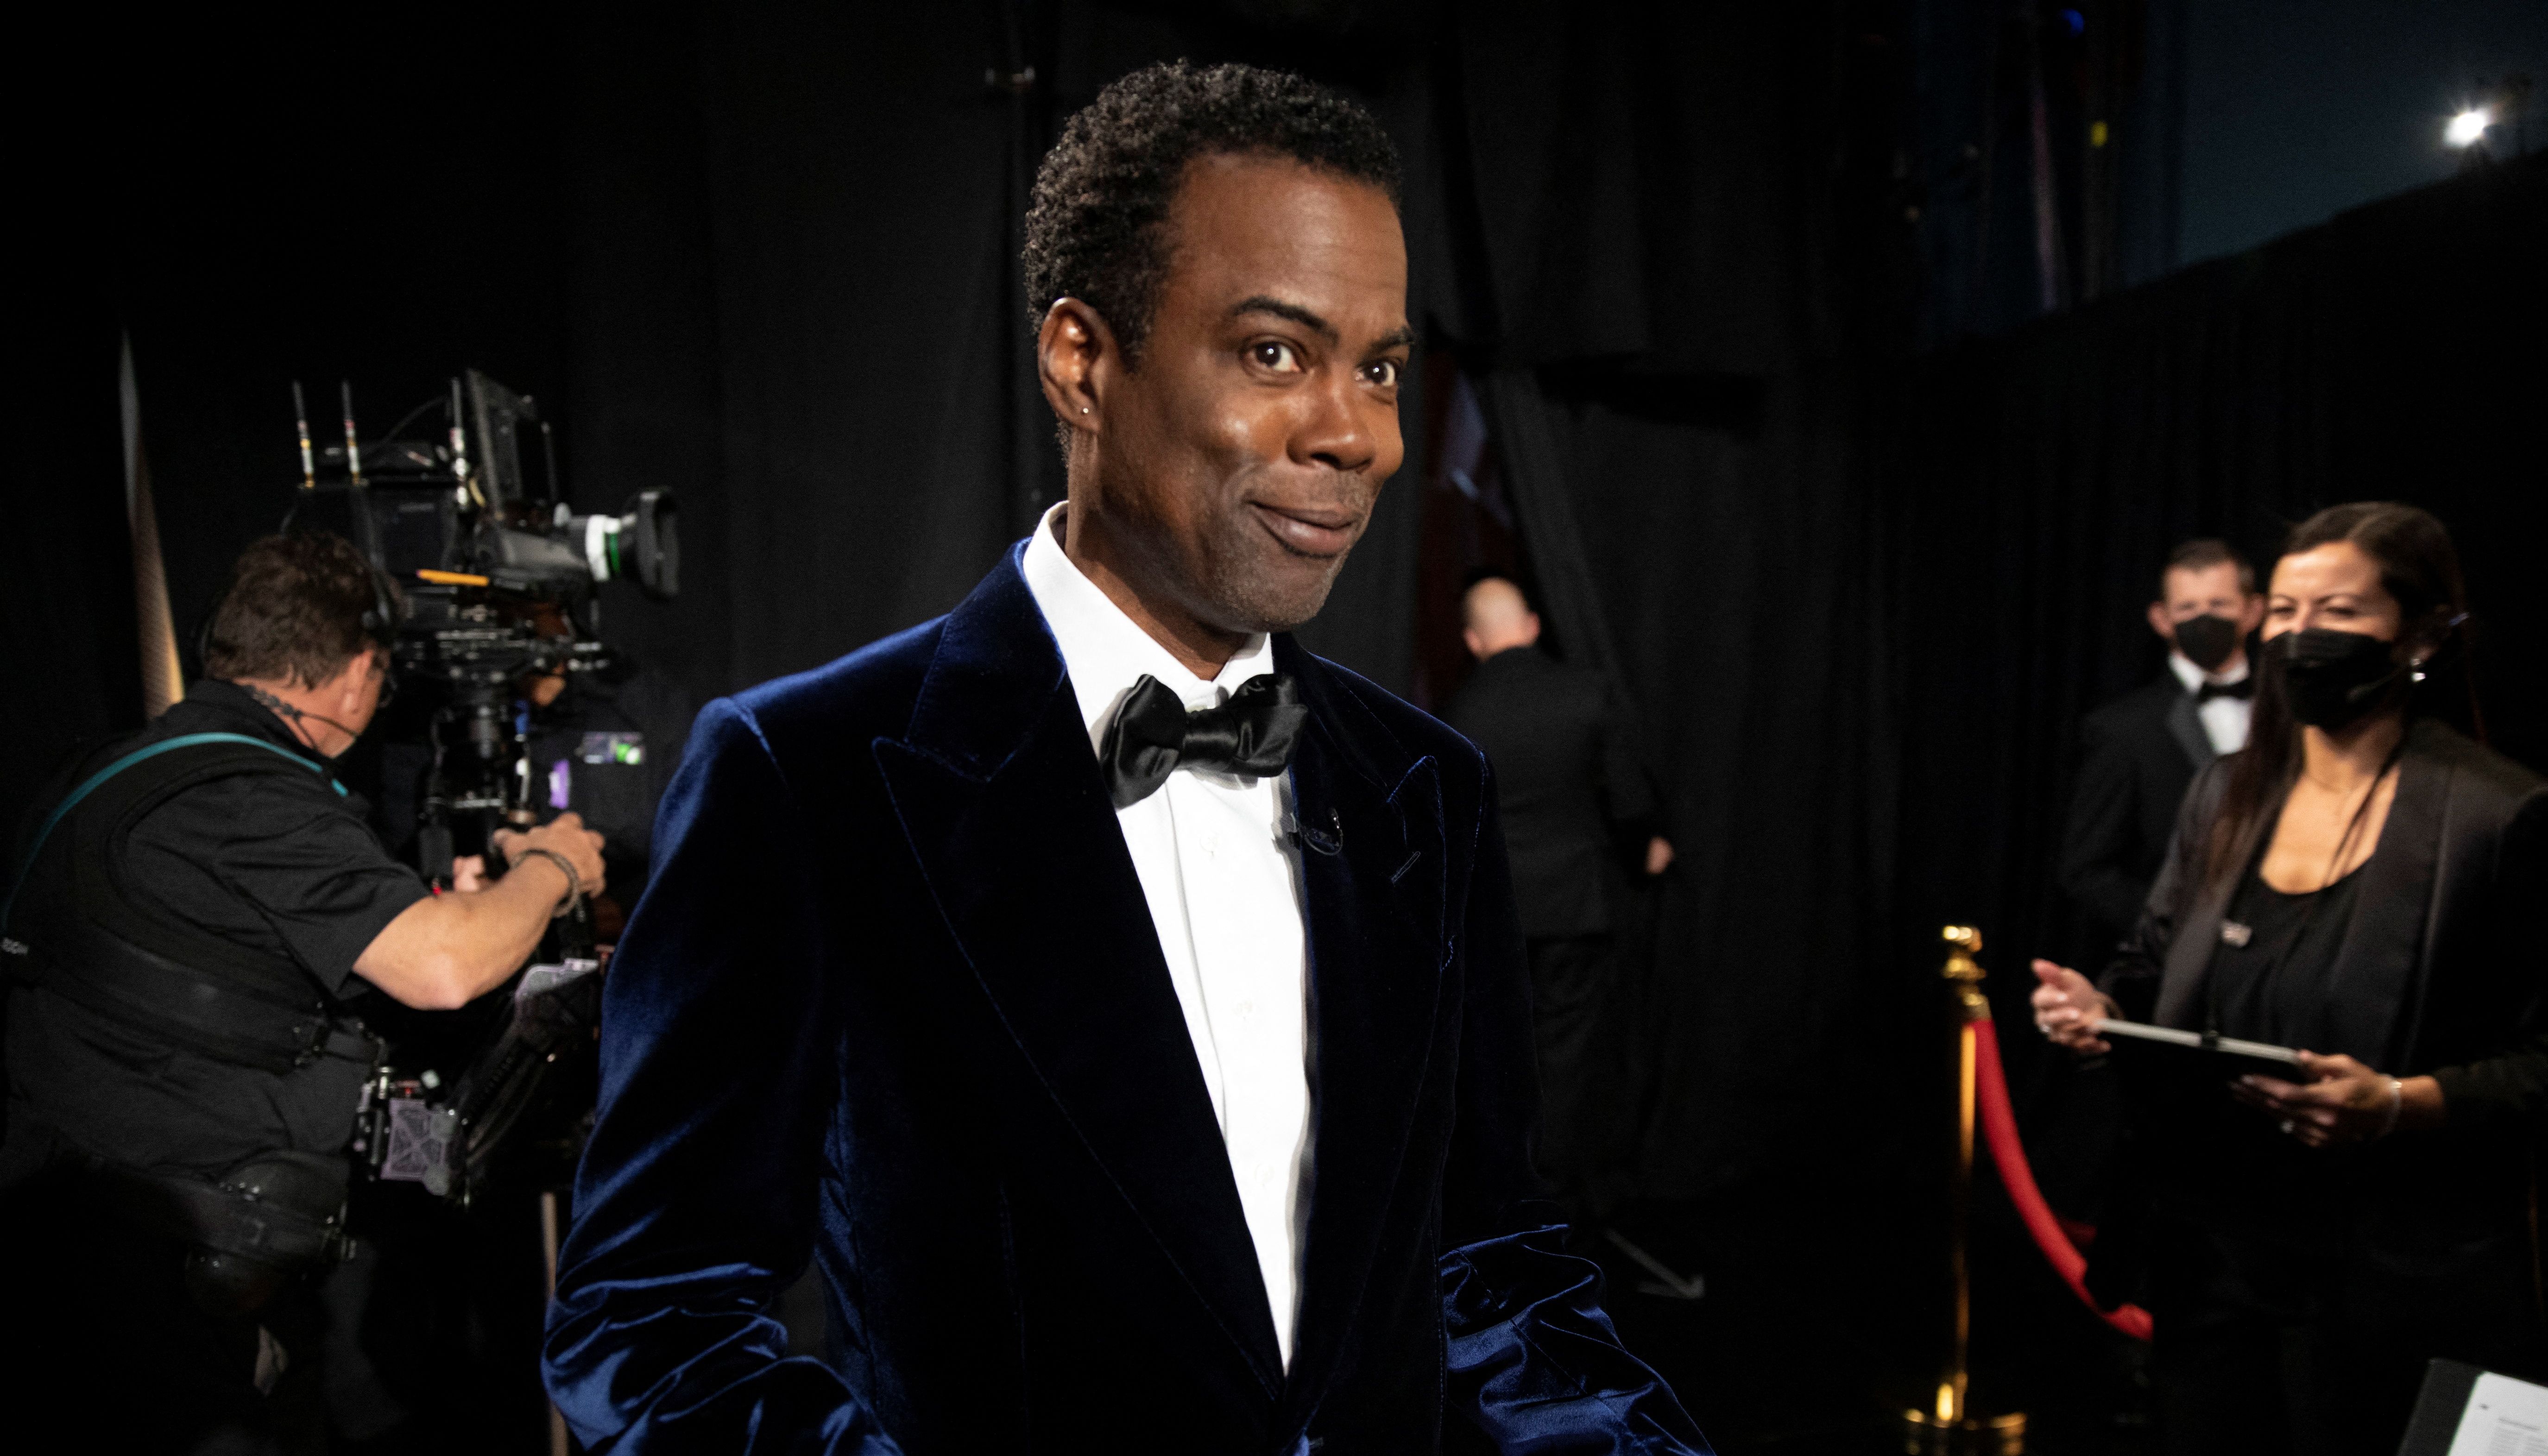 Chris Rock stands backstage at the 94th Academy Awards in Hollywood, Los Angeles, California, U.S.